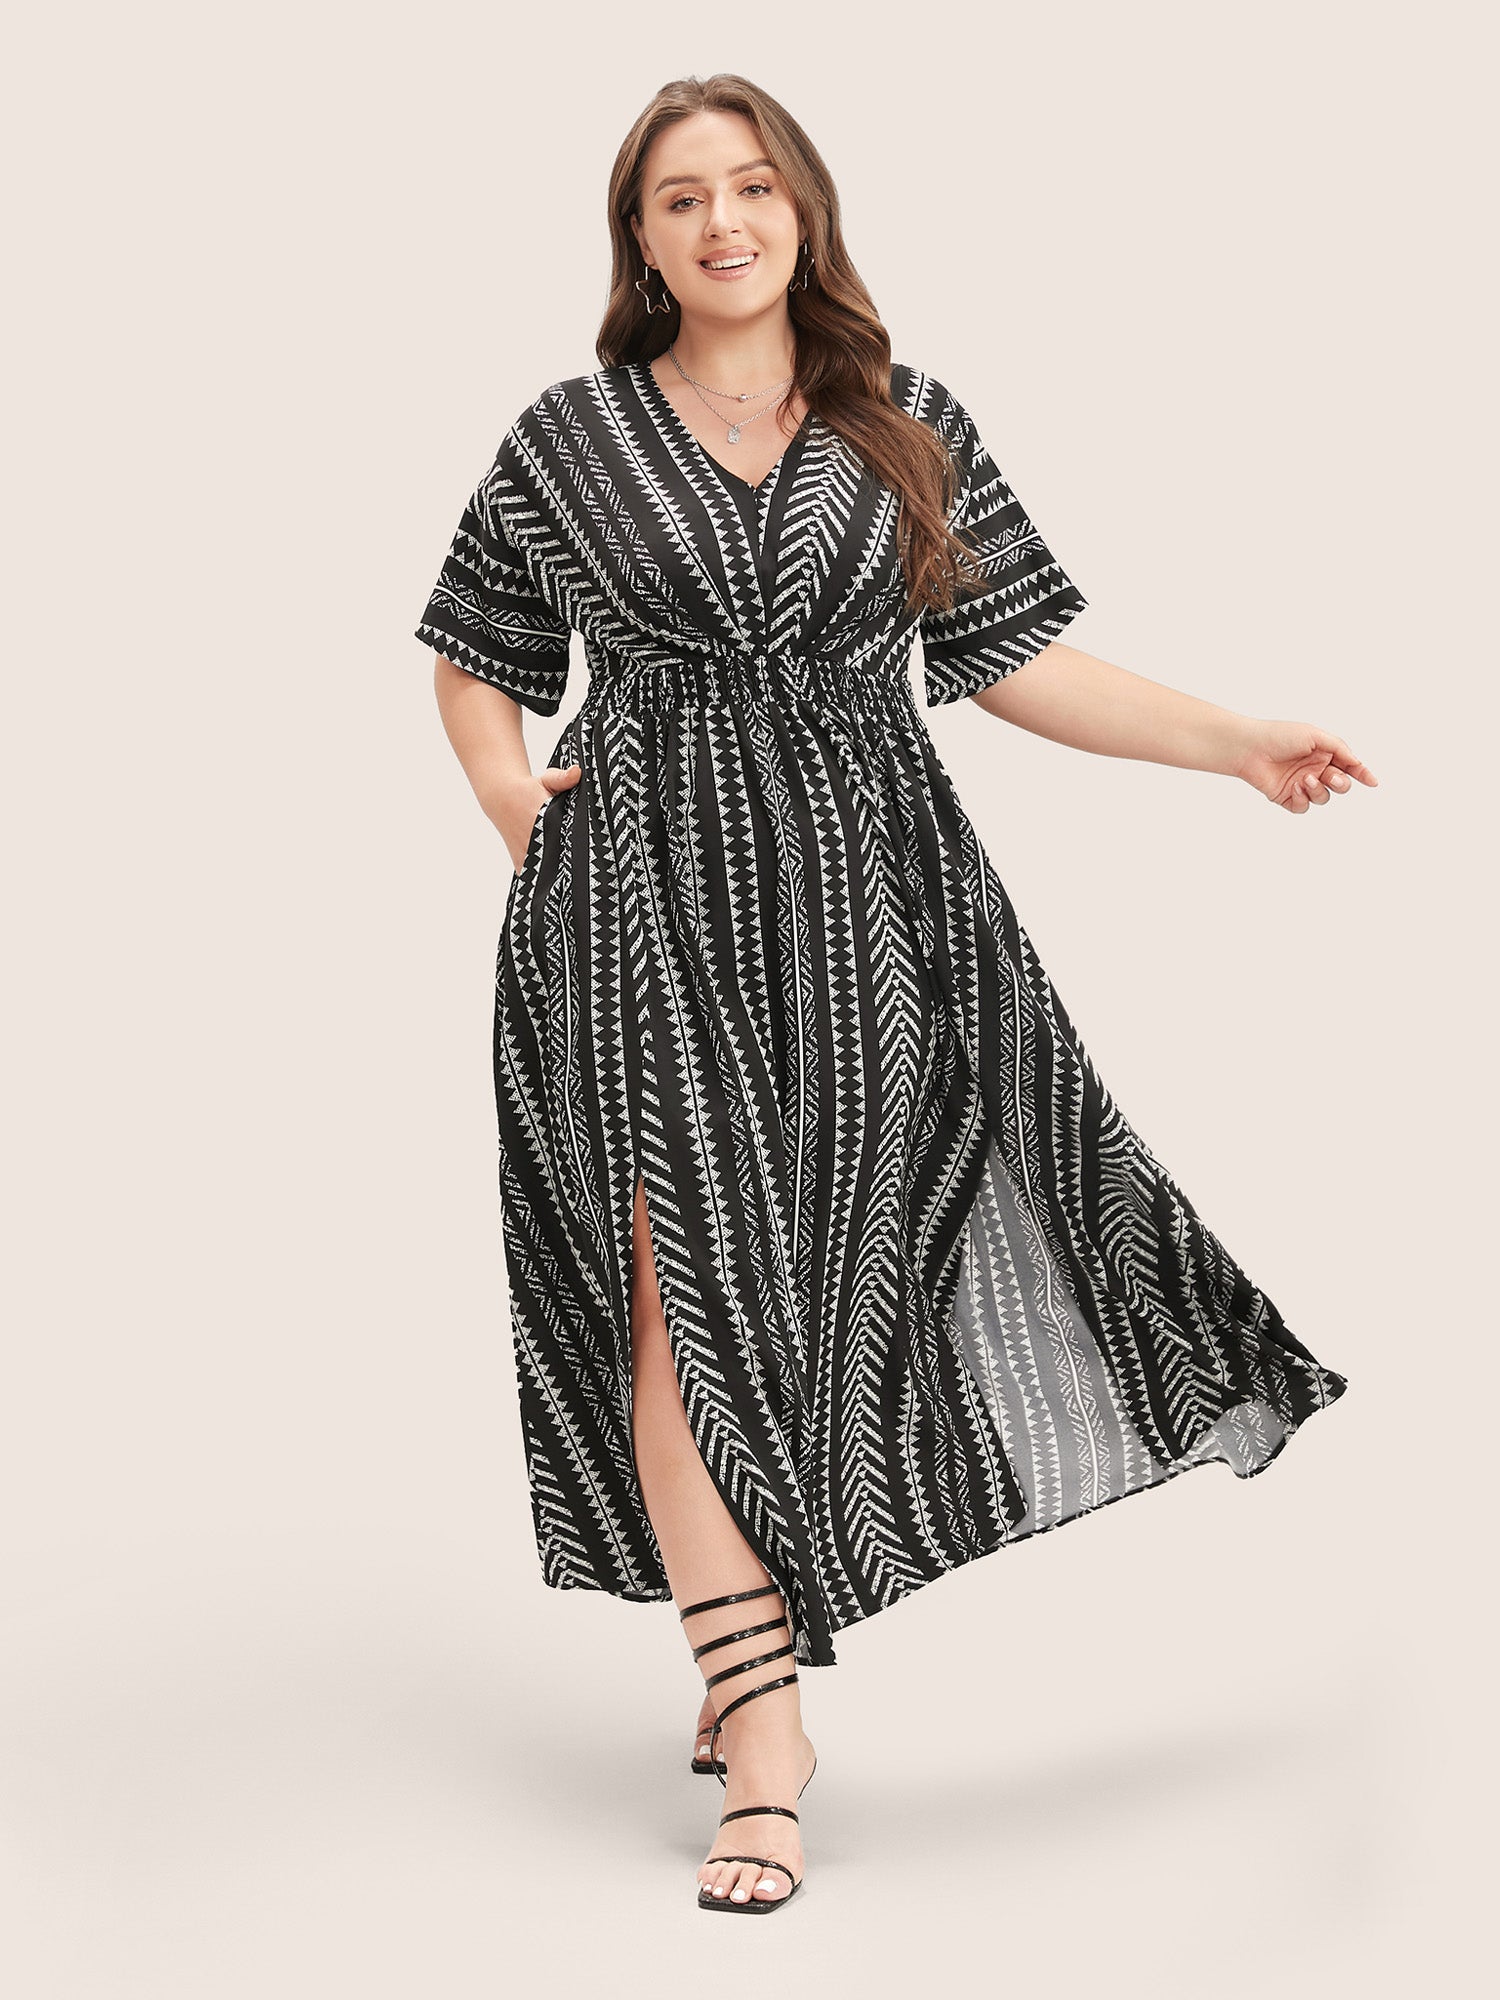 Plus Size and Curvy Fit Dresses for Women Sizes 10-30 | BloomChic